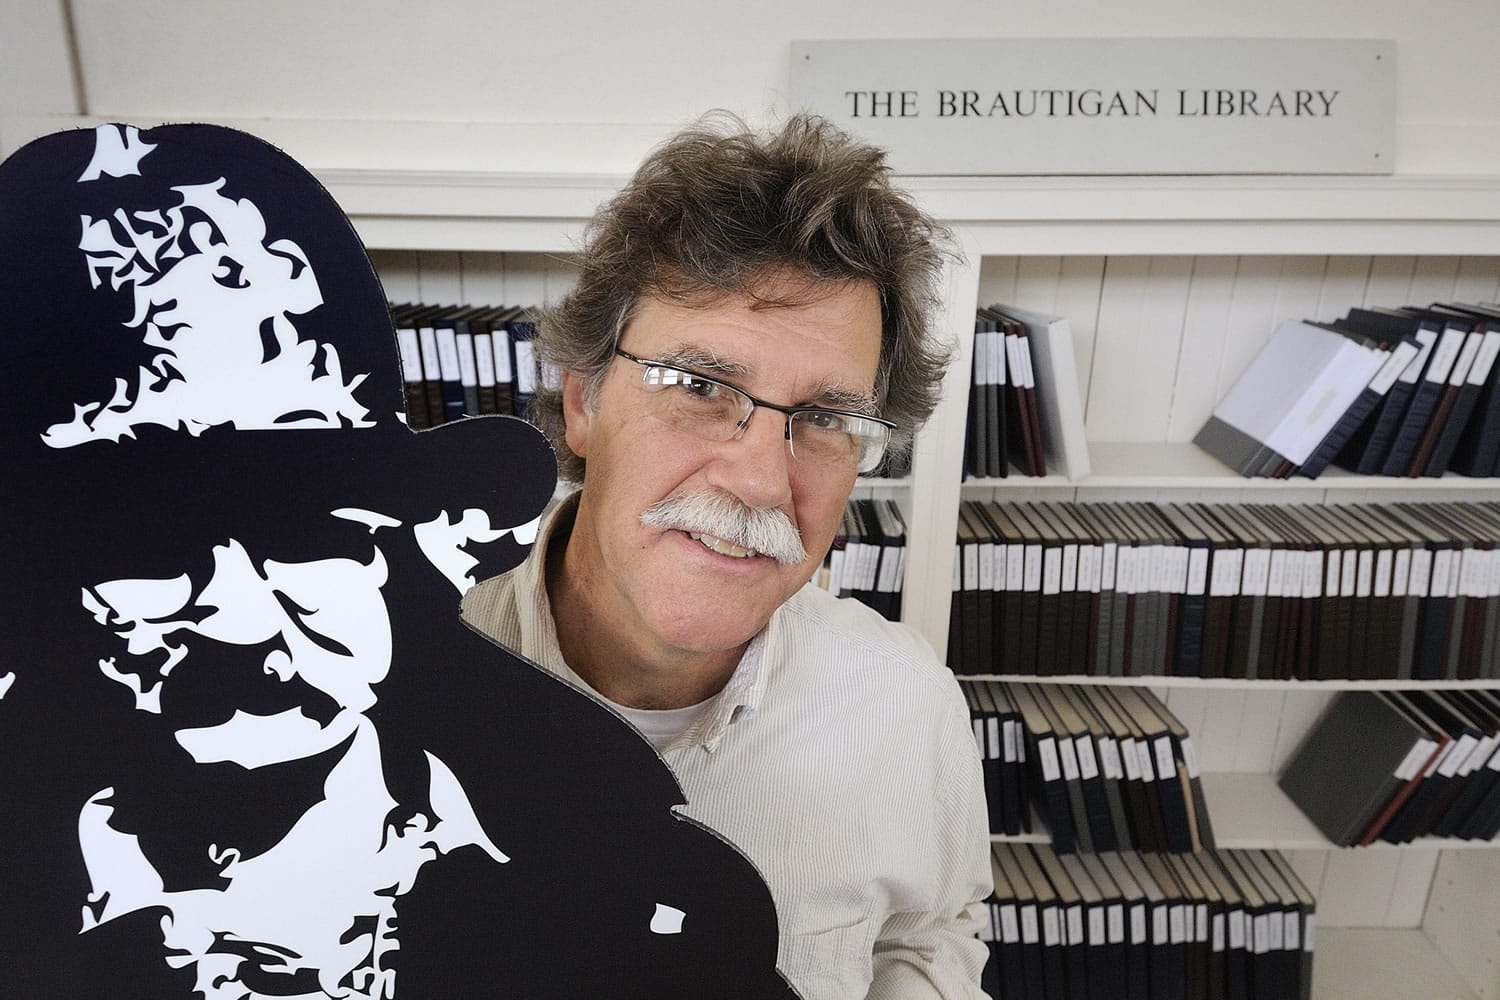 John F. Barber, with the Creative Media &amp; Digital Culture Program at Washington State University Vancouver, holds a cardboard cutout next to a display of The Brautigan Library at The Clark County Historical Museum.